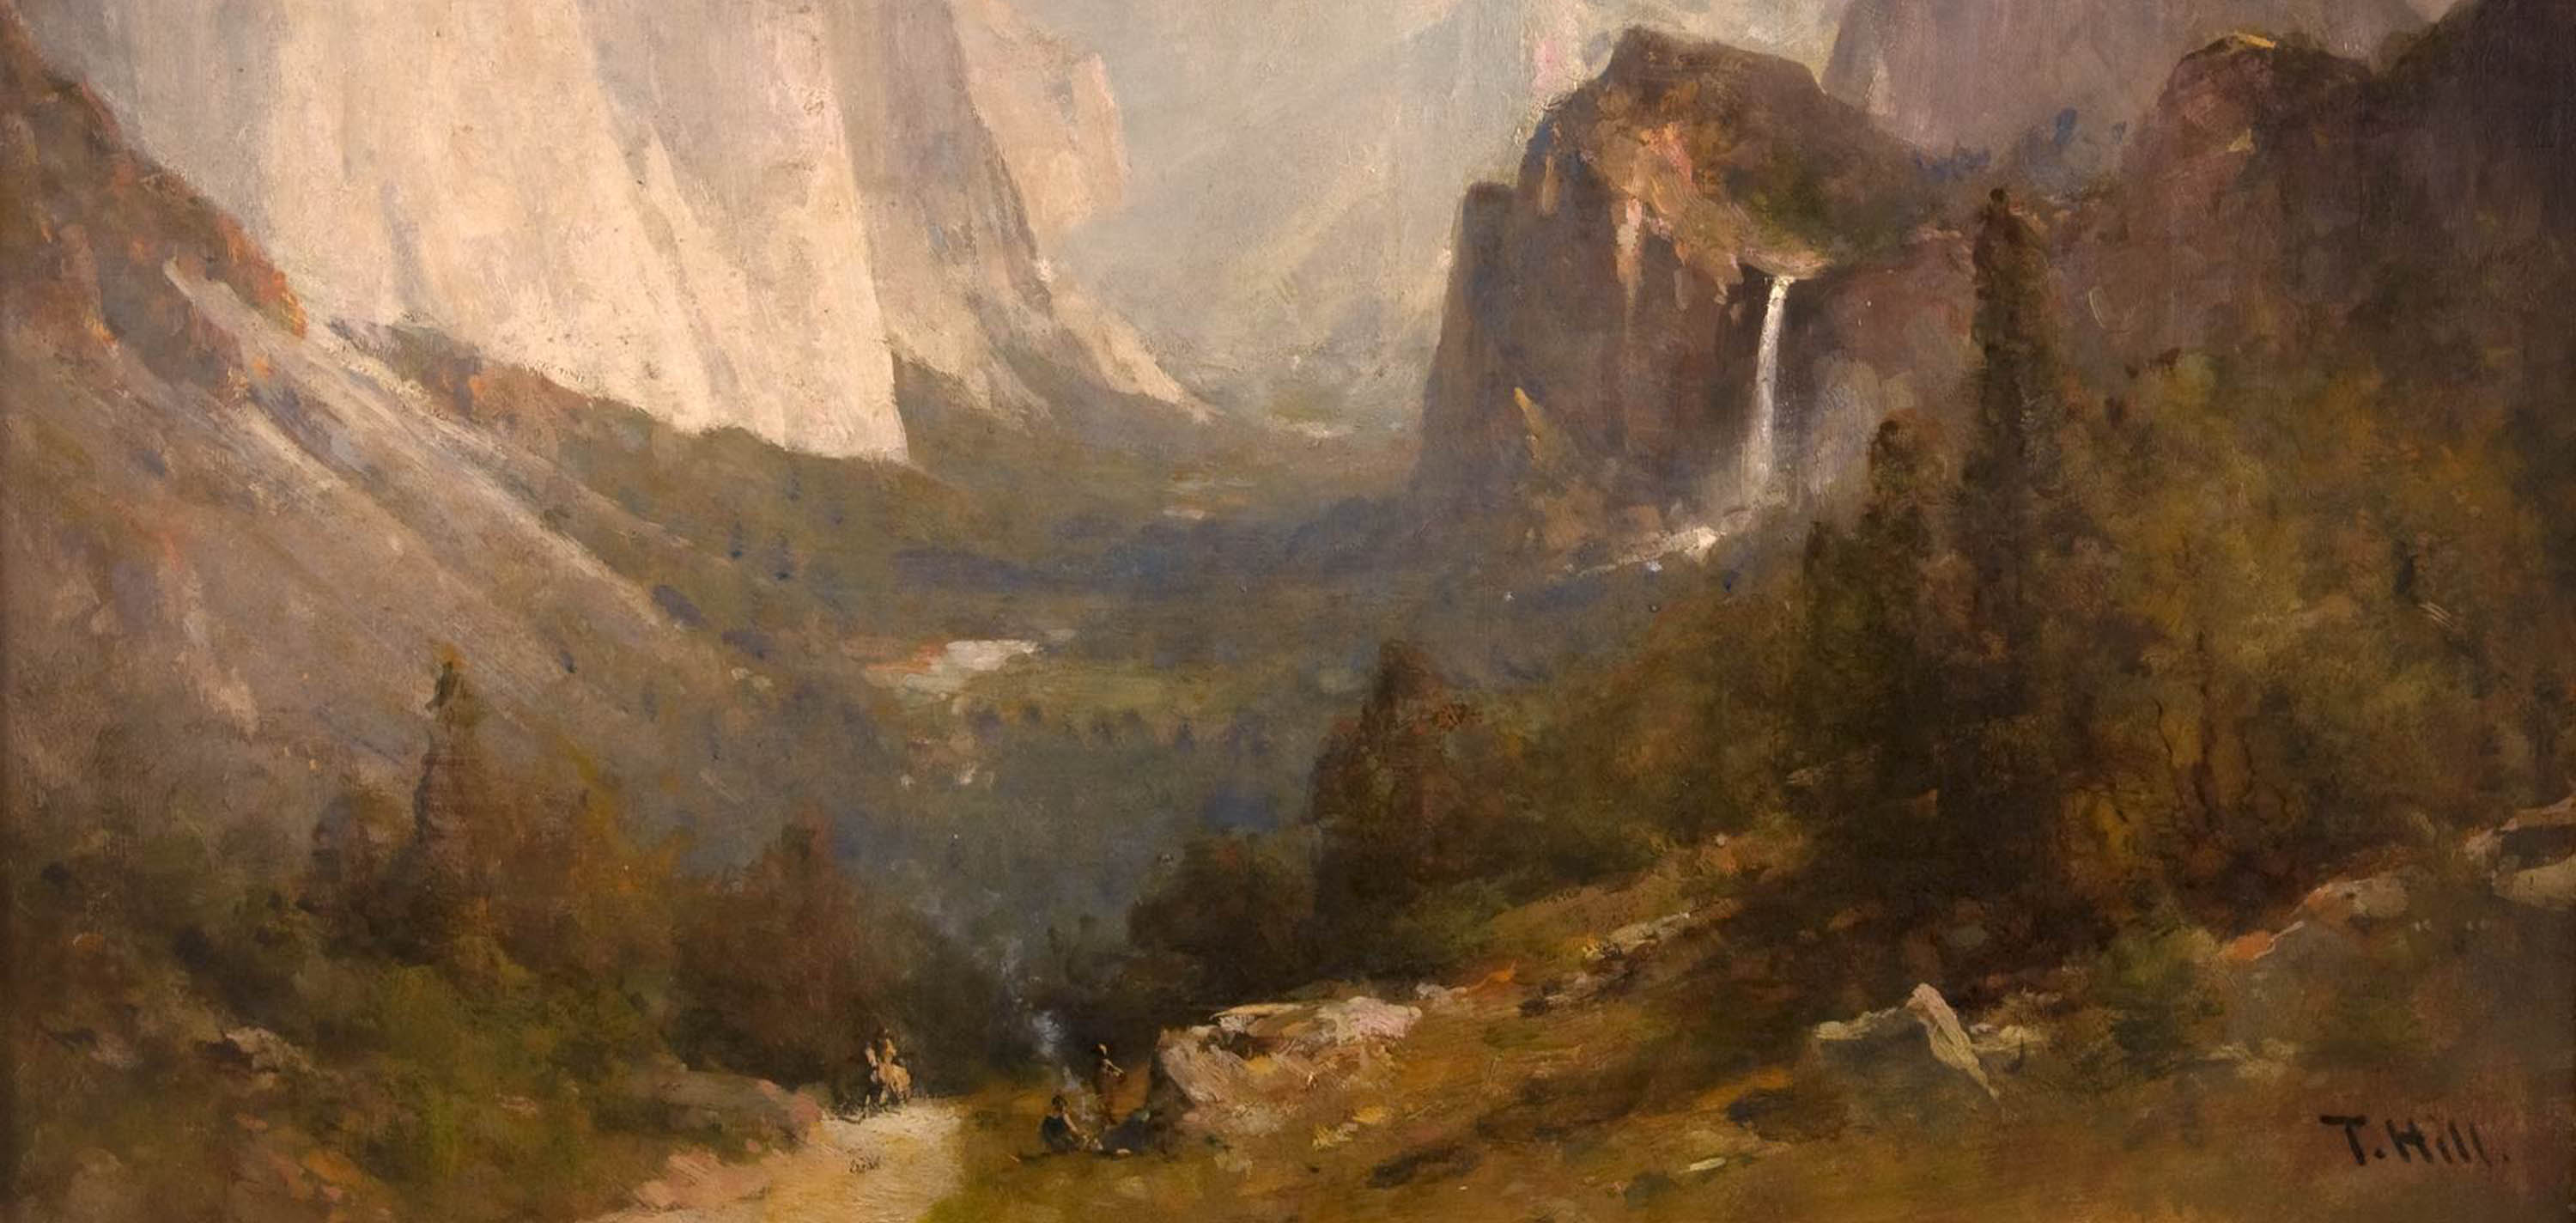 Painting of View from Inspiration Point by Thomas Hill